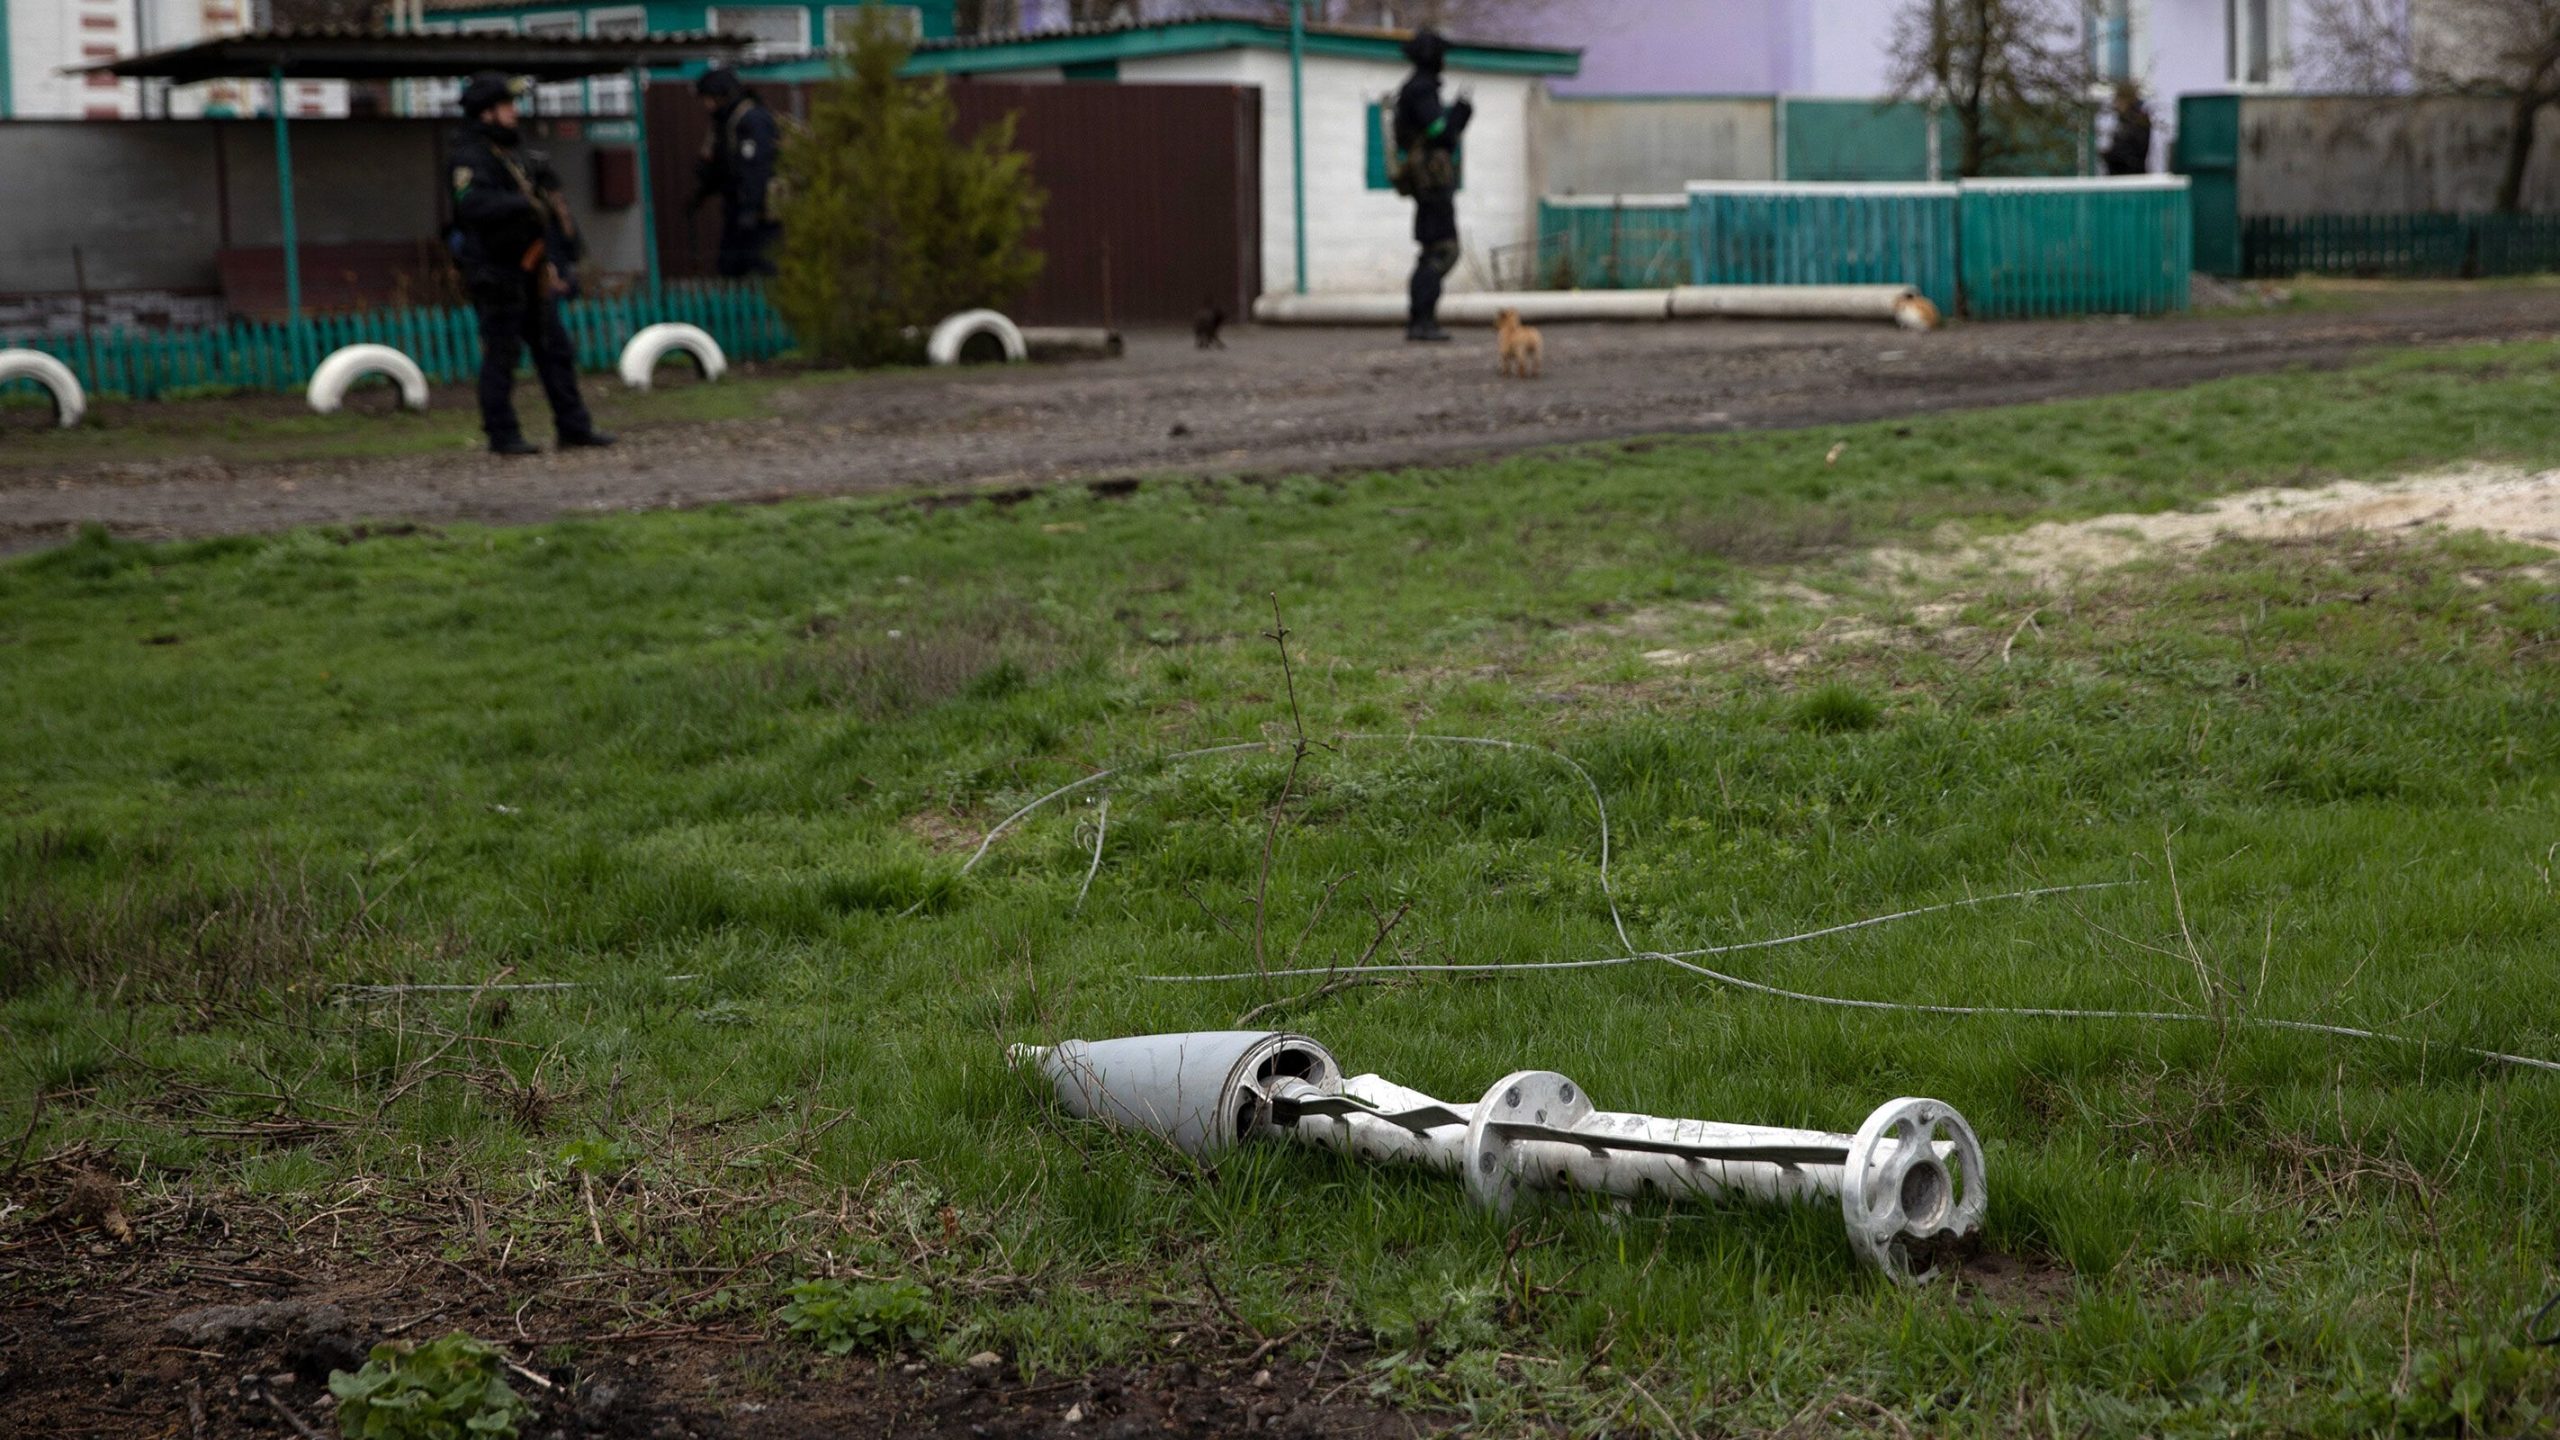 Ukraine has started using US provided cluster munitions in combat